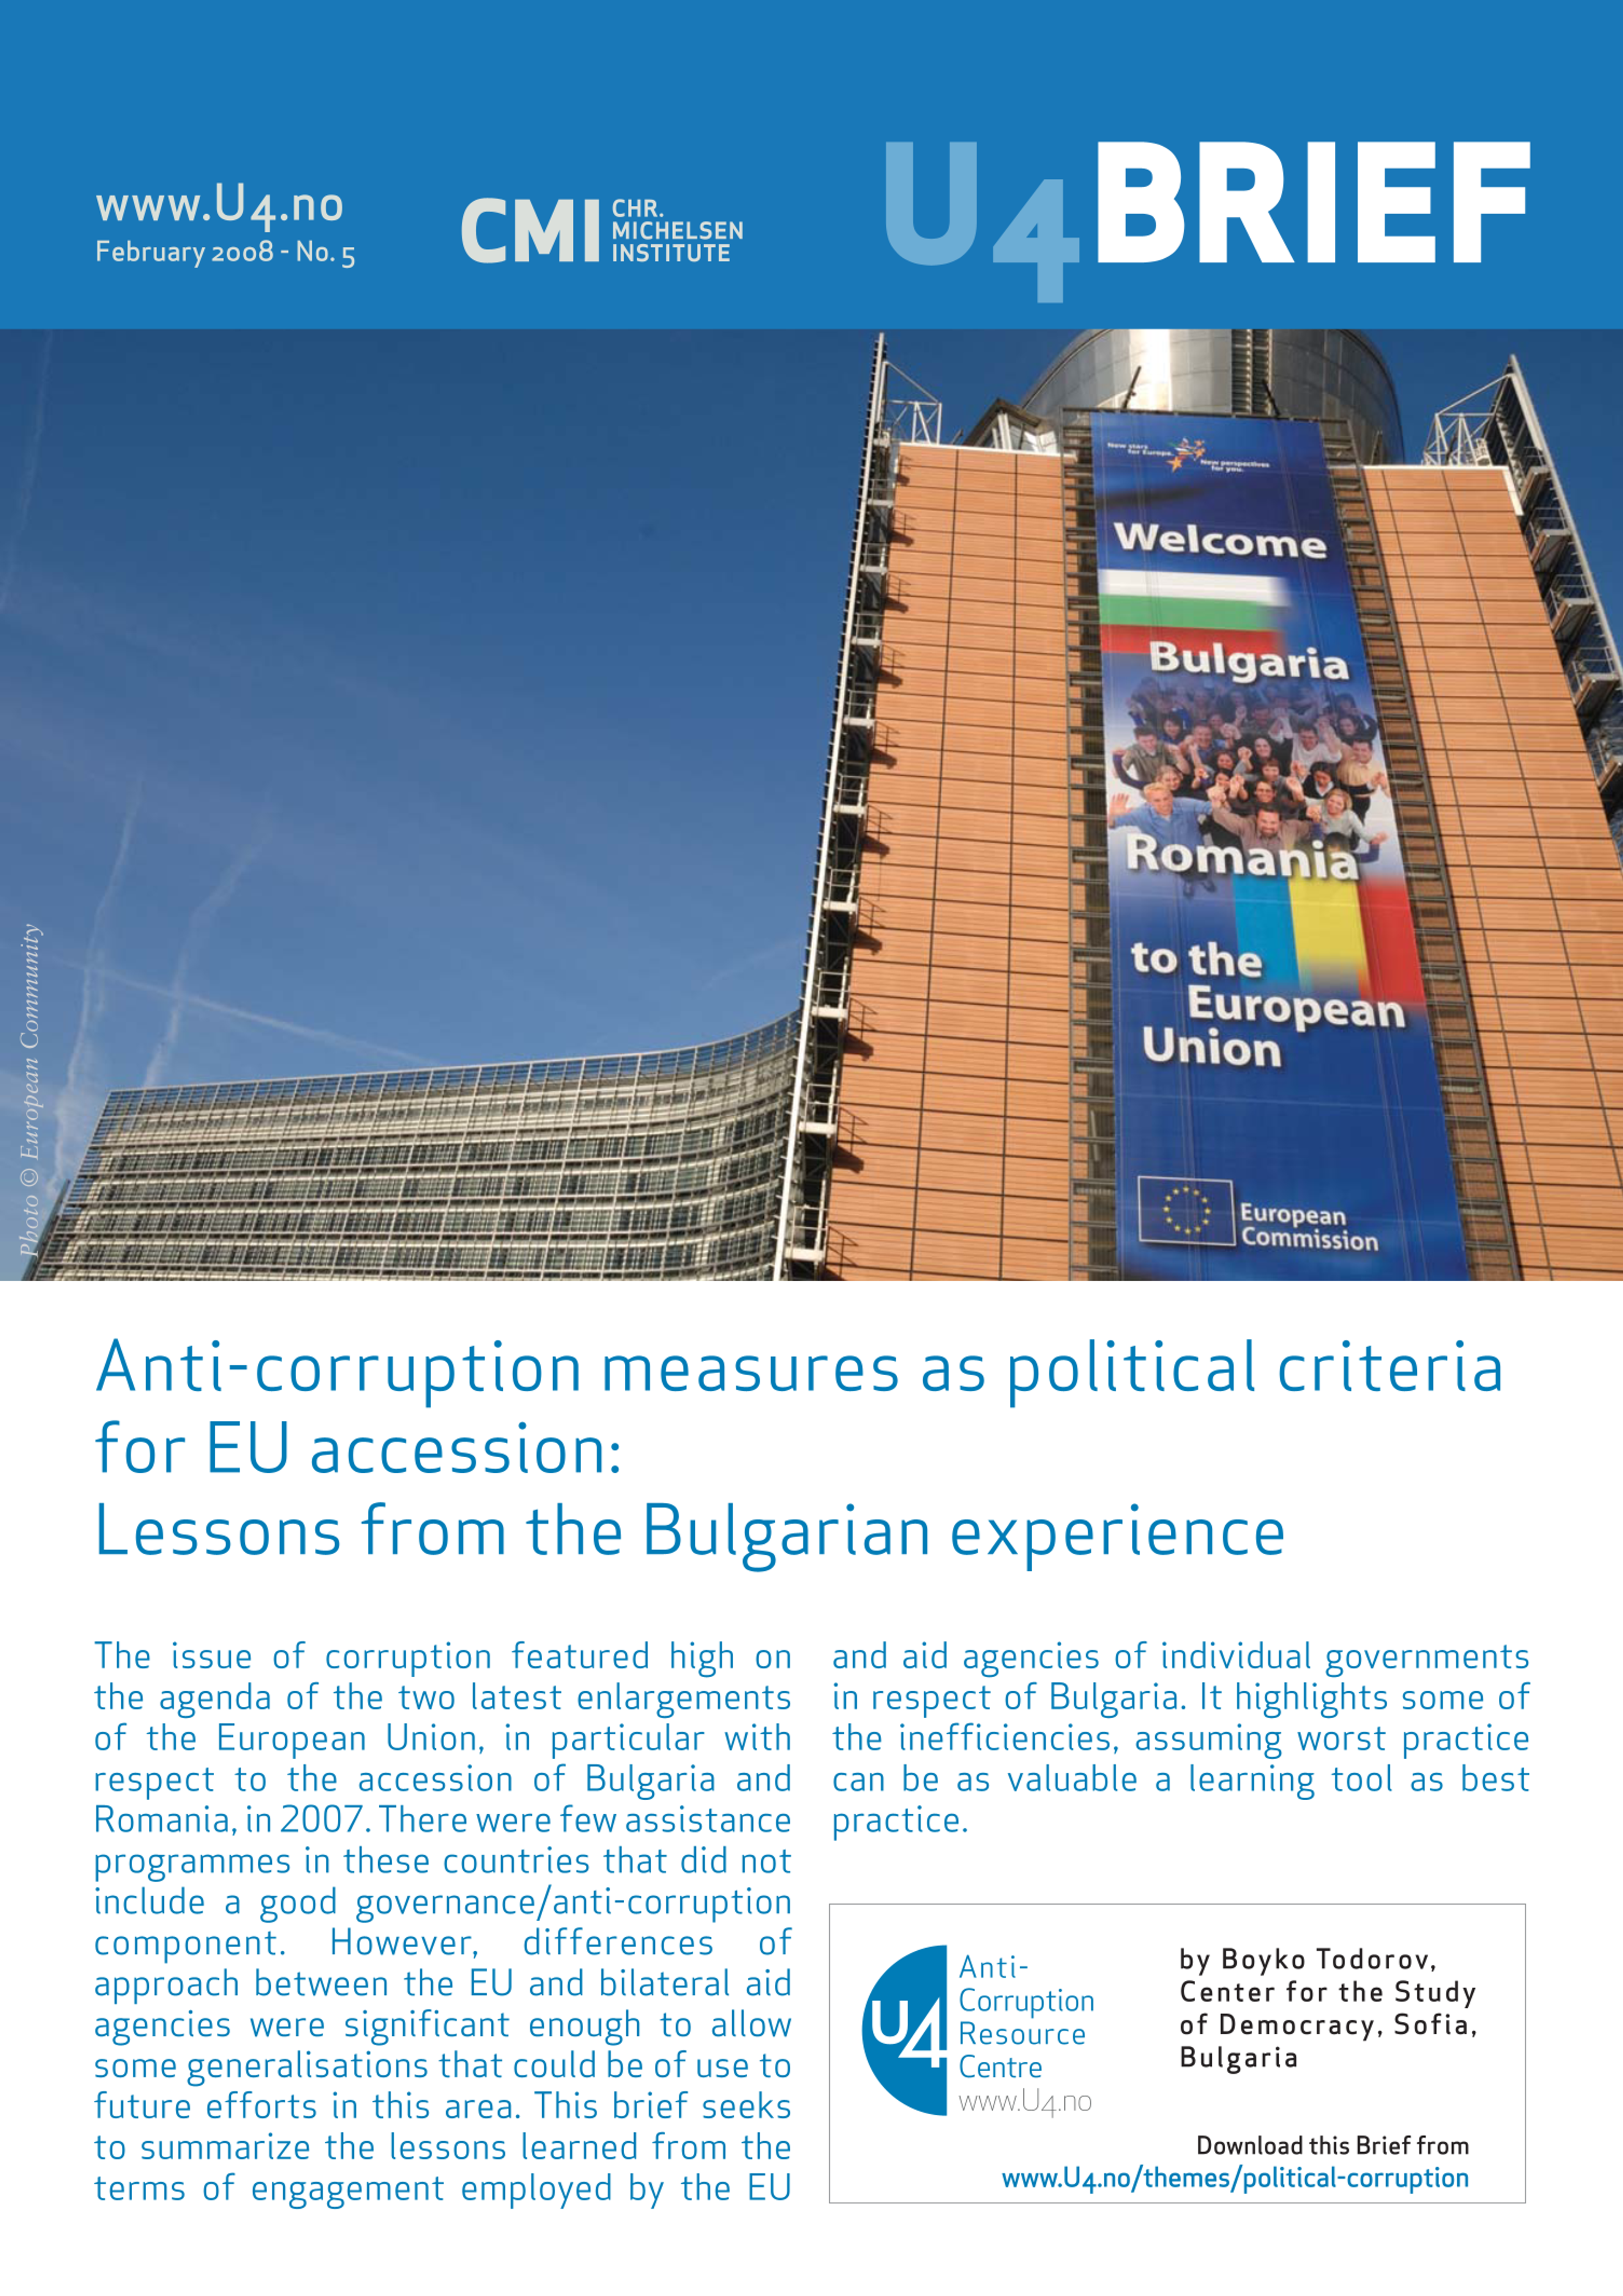 Anti-corruption measures as political criteria for EU accession: Lessons from the Bulgarian experience